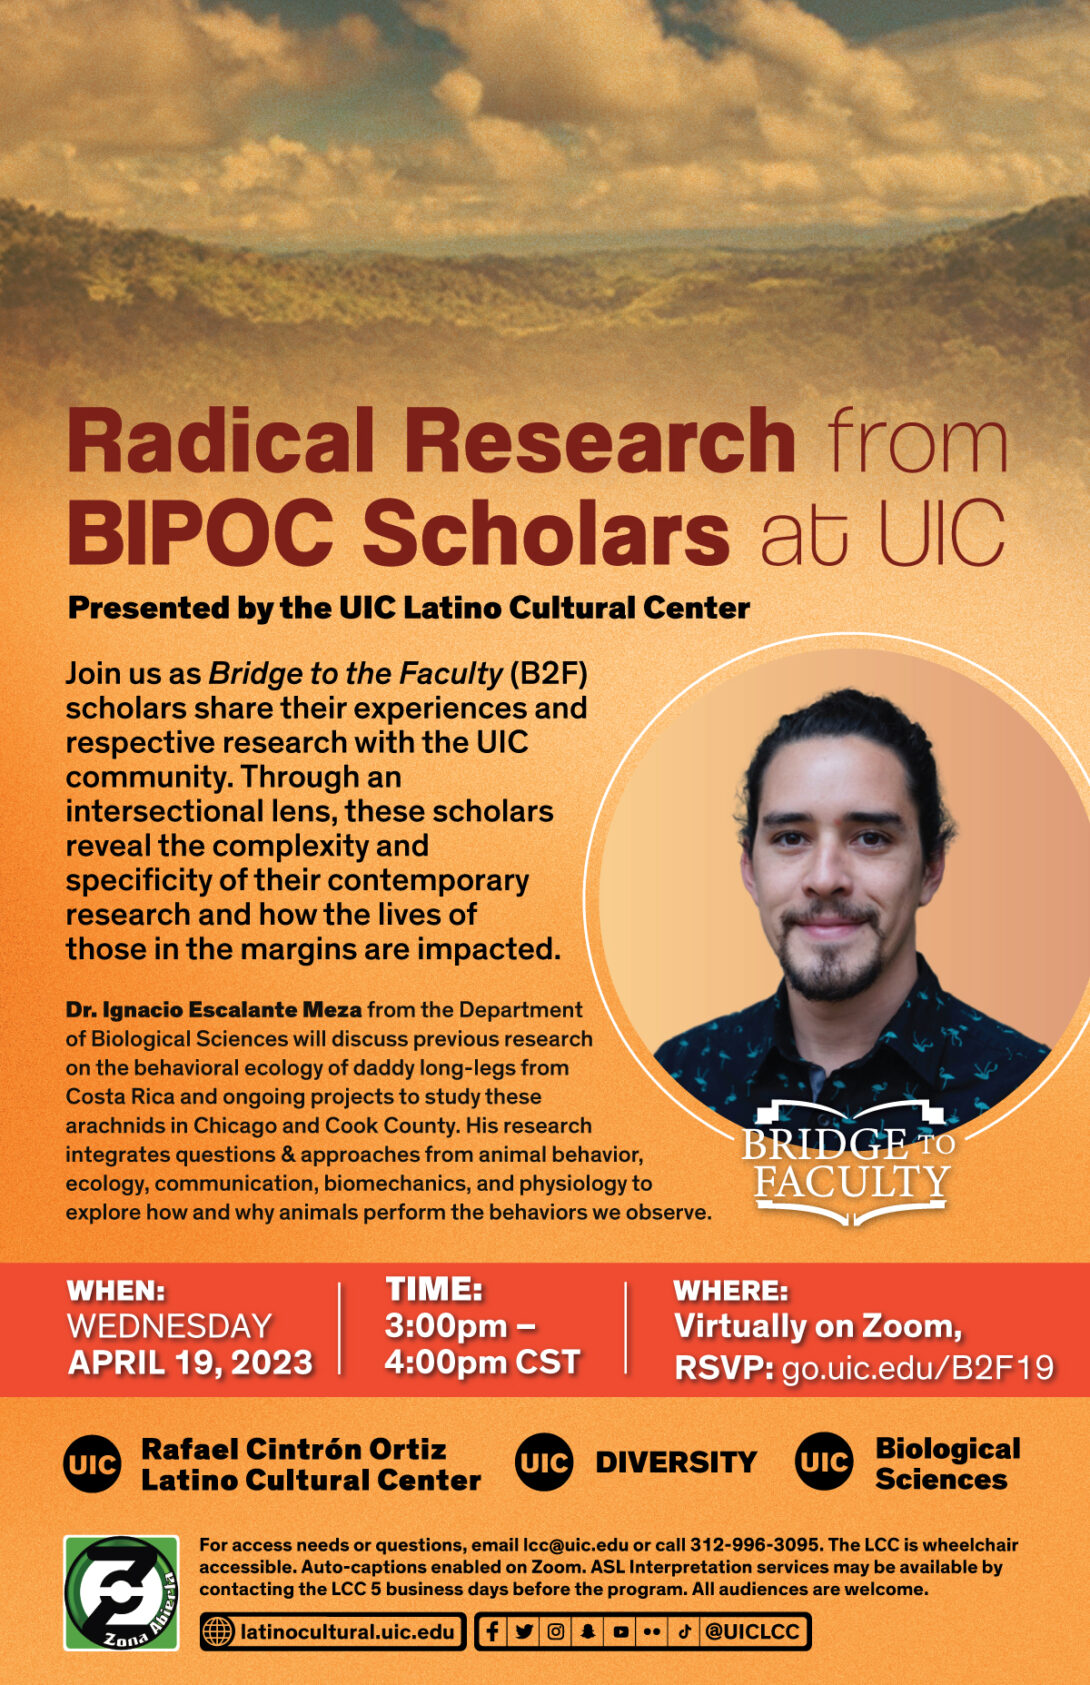 A light orange background with a photo of Dr. Ignacio Escalante Meza to the right. At the top is the event title in dark red text, and the event details below in black text.